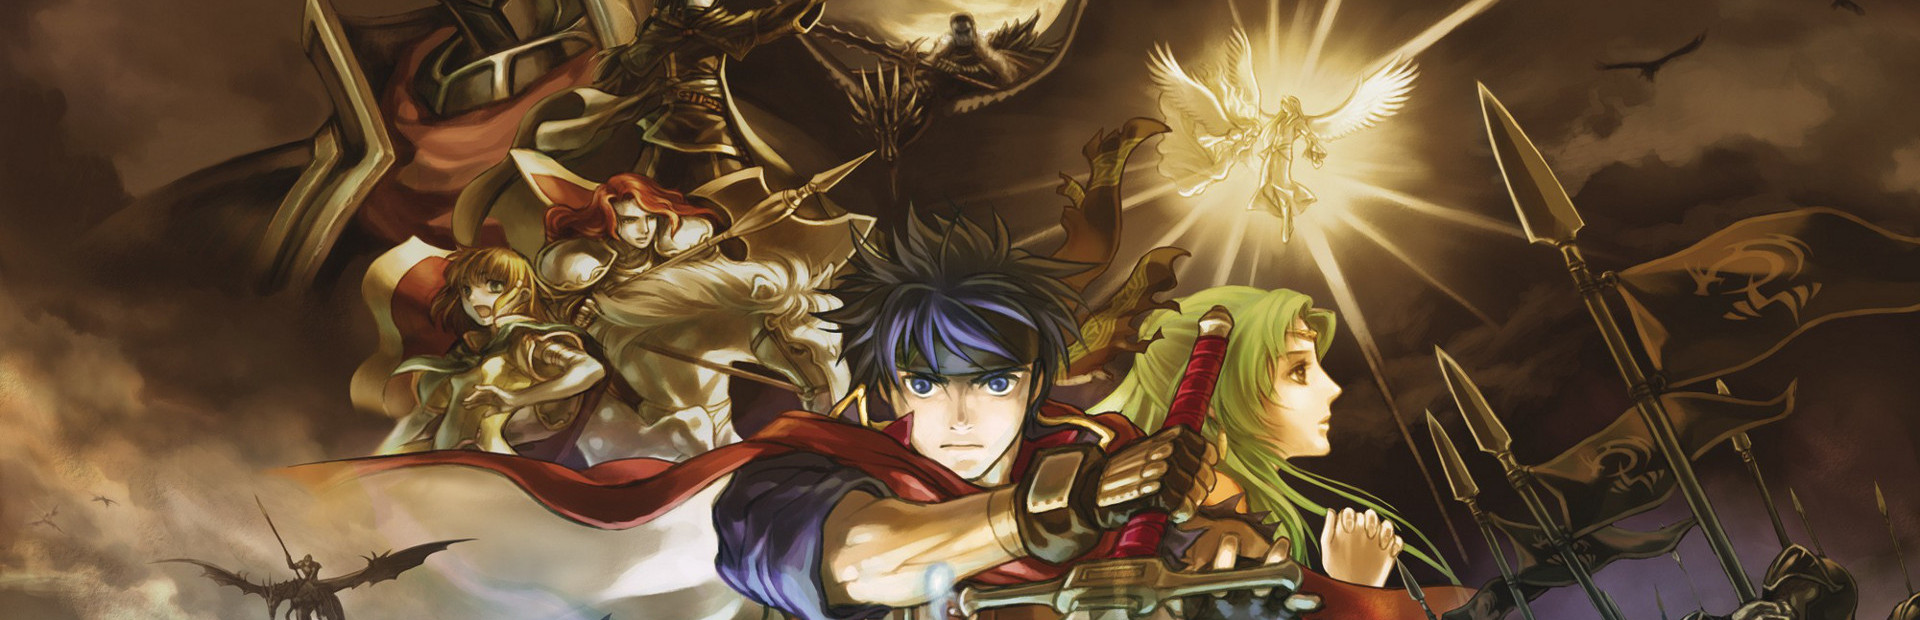 Pictures Fire Emblem Emblem Path of Radiance vdeo game